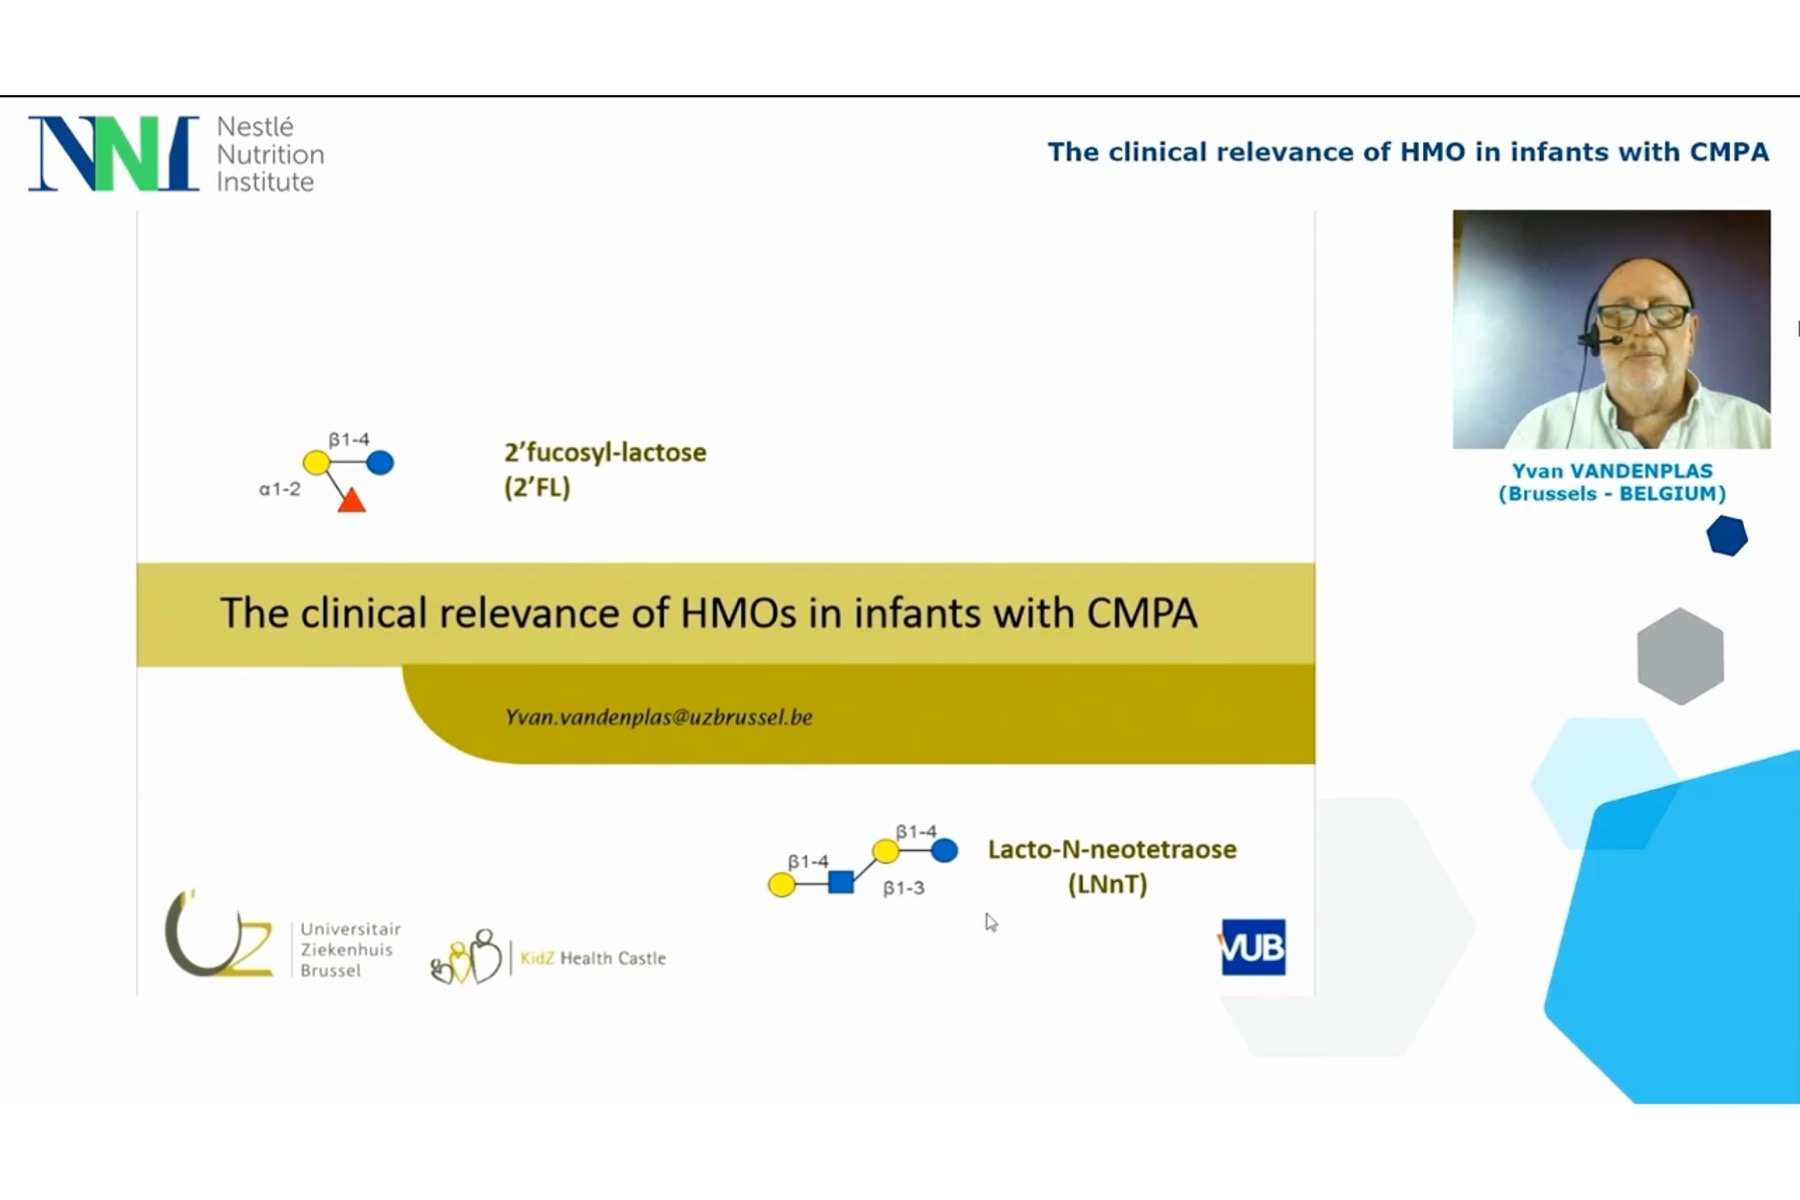 The clinical relevance of HMOs in infants with CMPA